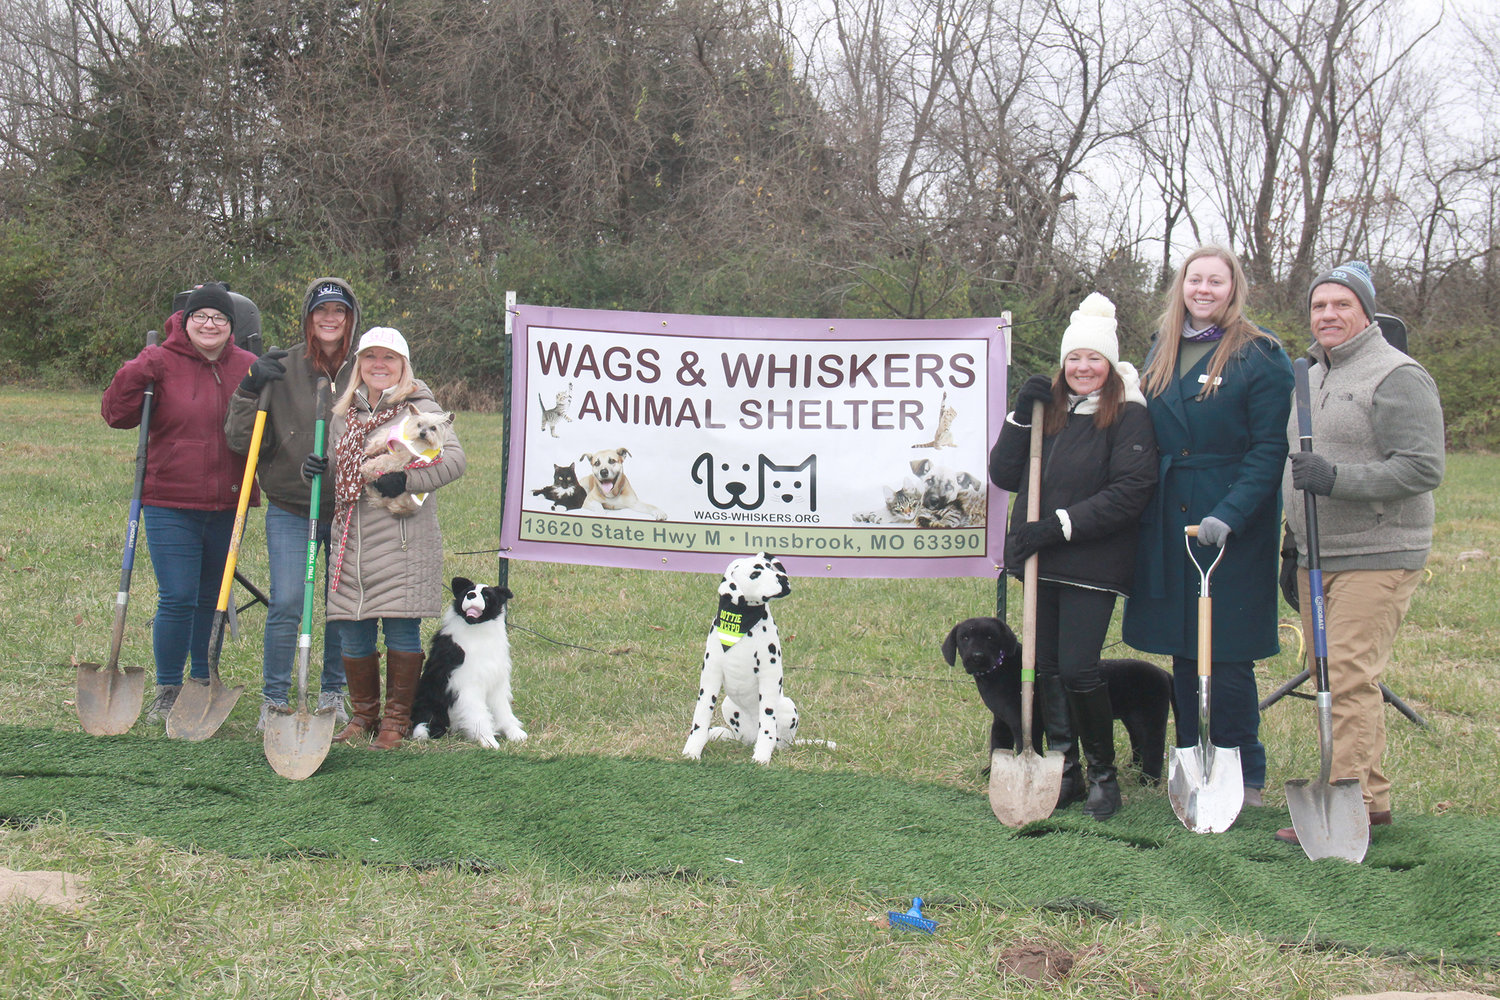 GROUNDBREAKING — Wags & Whiskers board members hosted a groundbreaking ceremony Nov. 12 to celebrate the future construction of a nonprofit animal shelter in the village of Innsbrook. Pictured, from left, are board members Taylor Erb, Penny McClain, Kathy Caton, Tracy Sator, Katie Joyce and Michael Bohm.